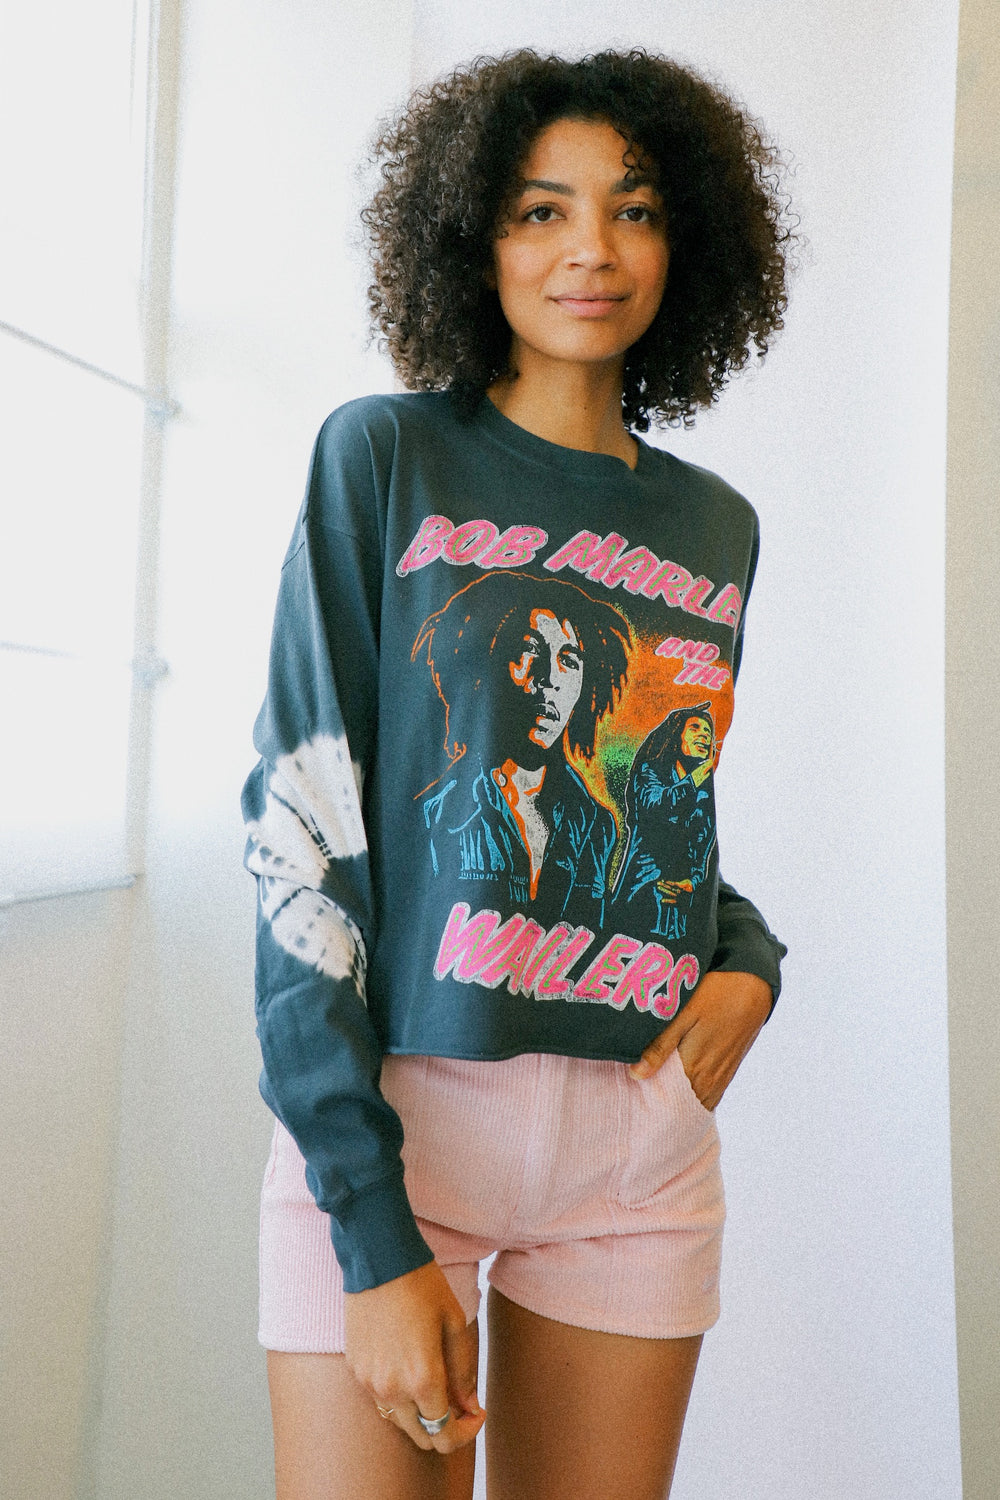 Bob Marley Could You Be Loved Oversized L/S Tee